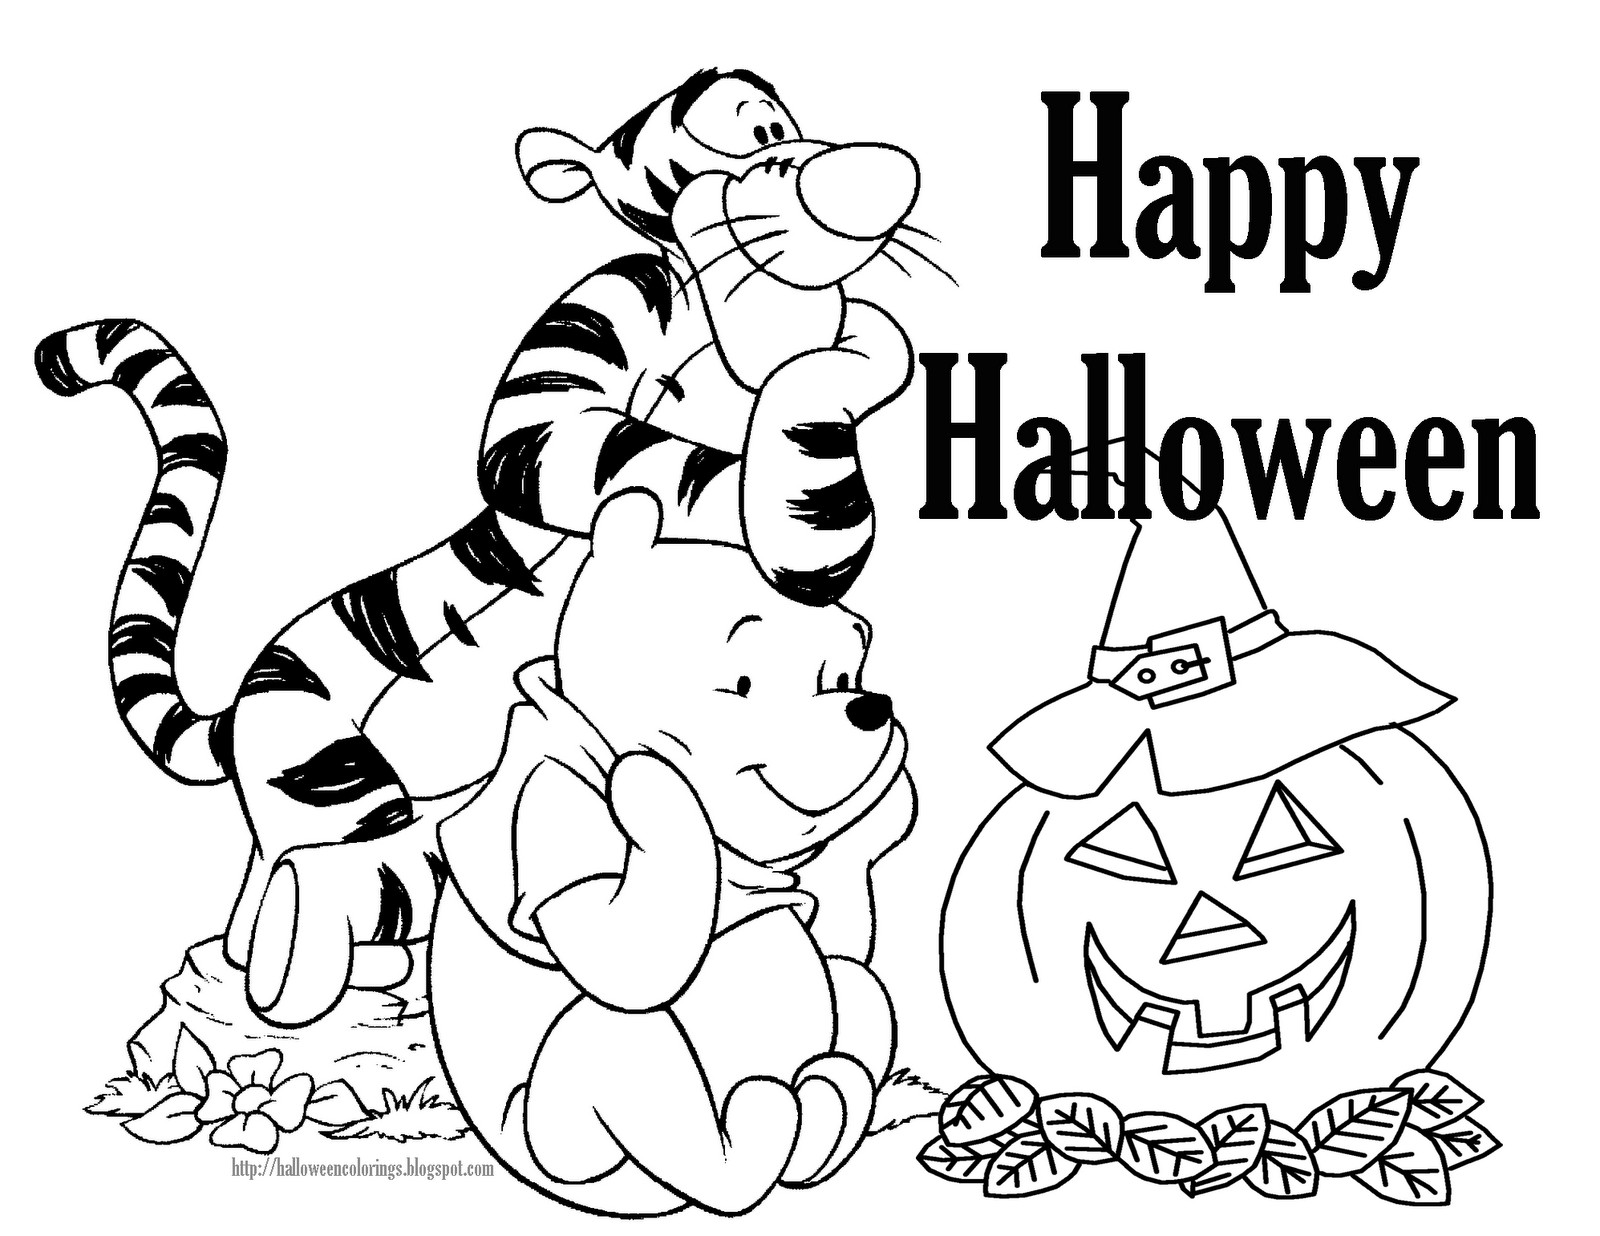 Printable Halloween Coloring Pages
 Halloween Coloring Pages – Free Printable Minnesota Miranda